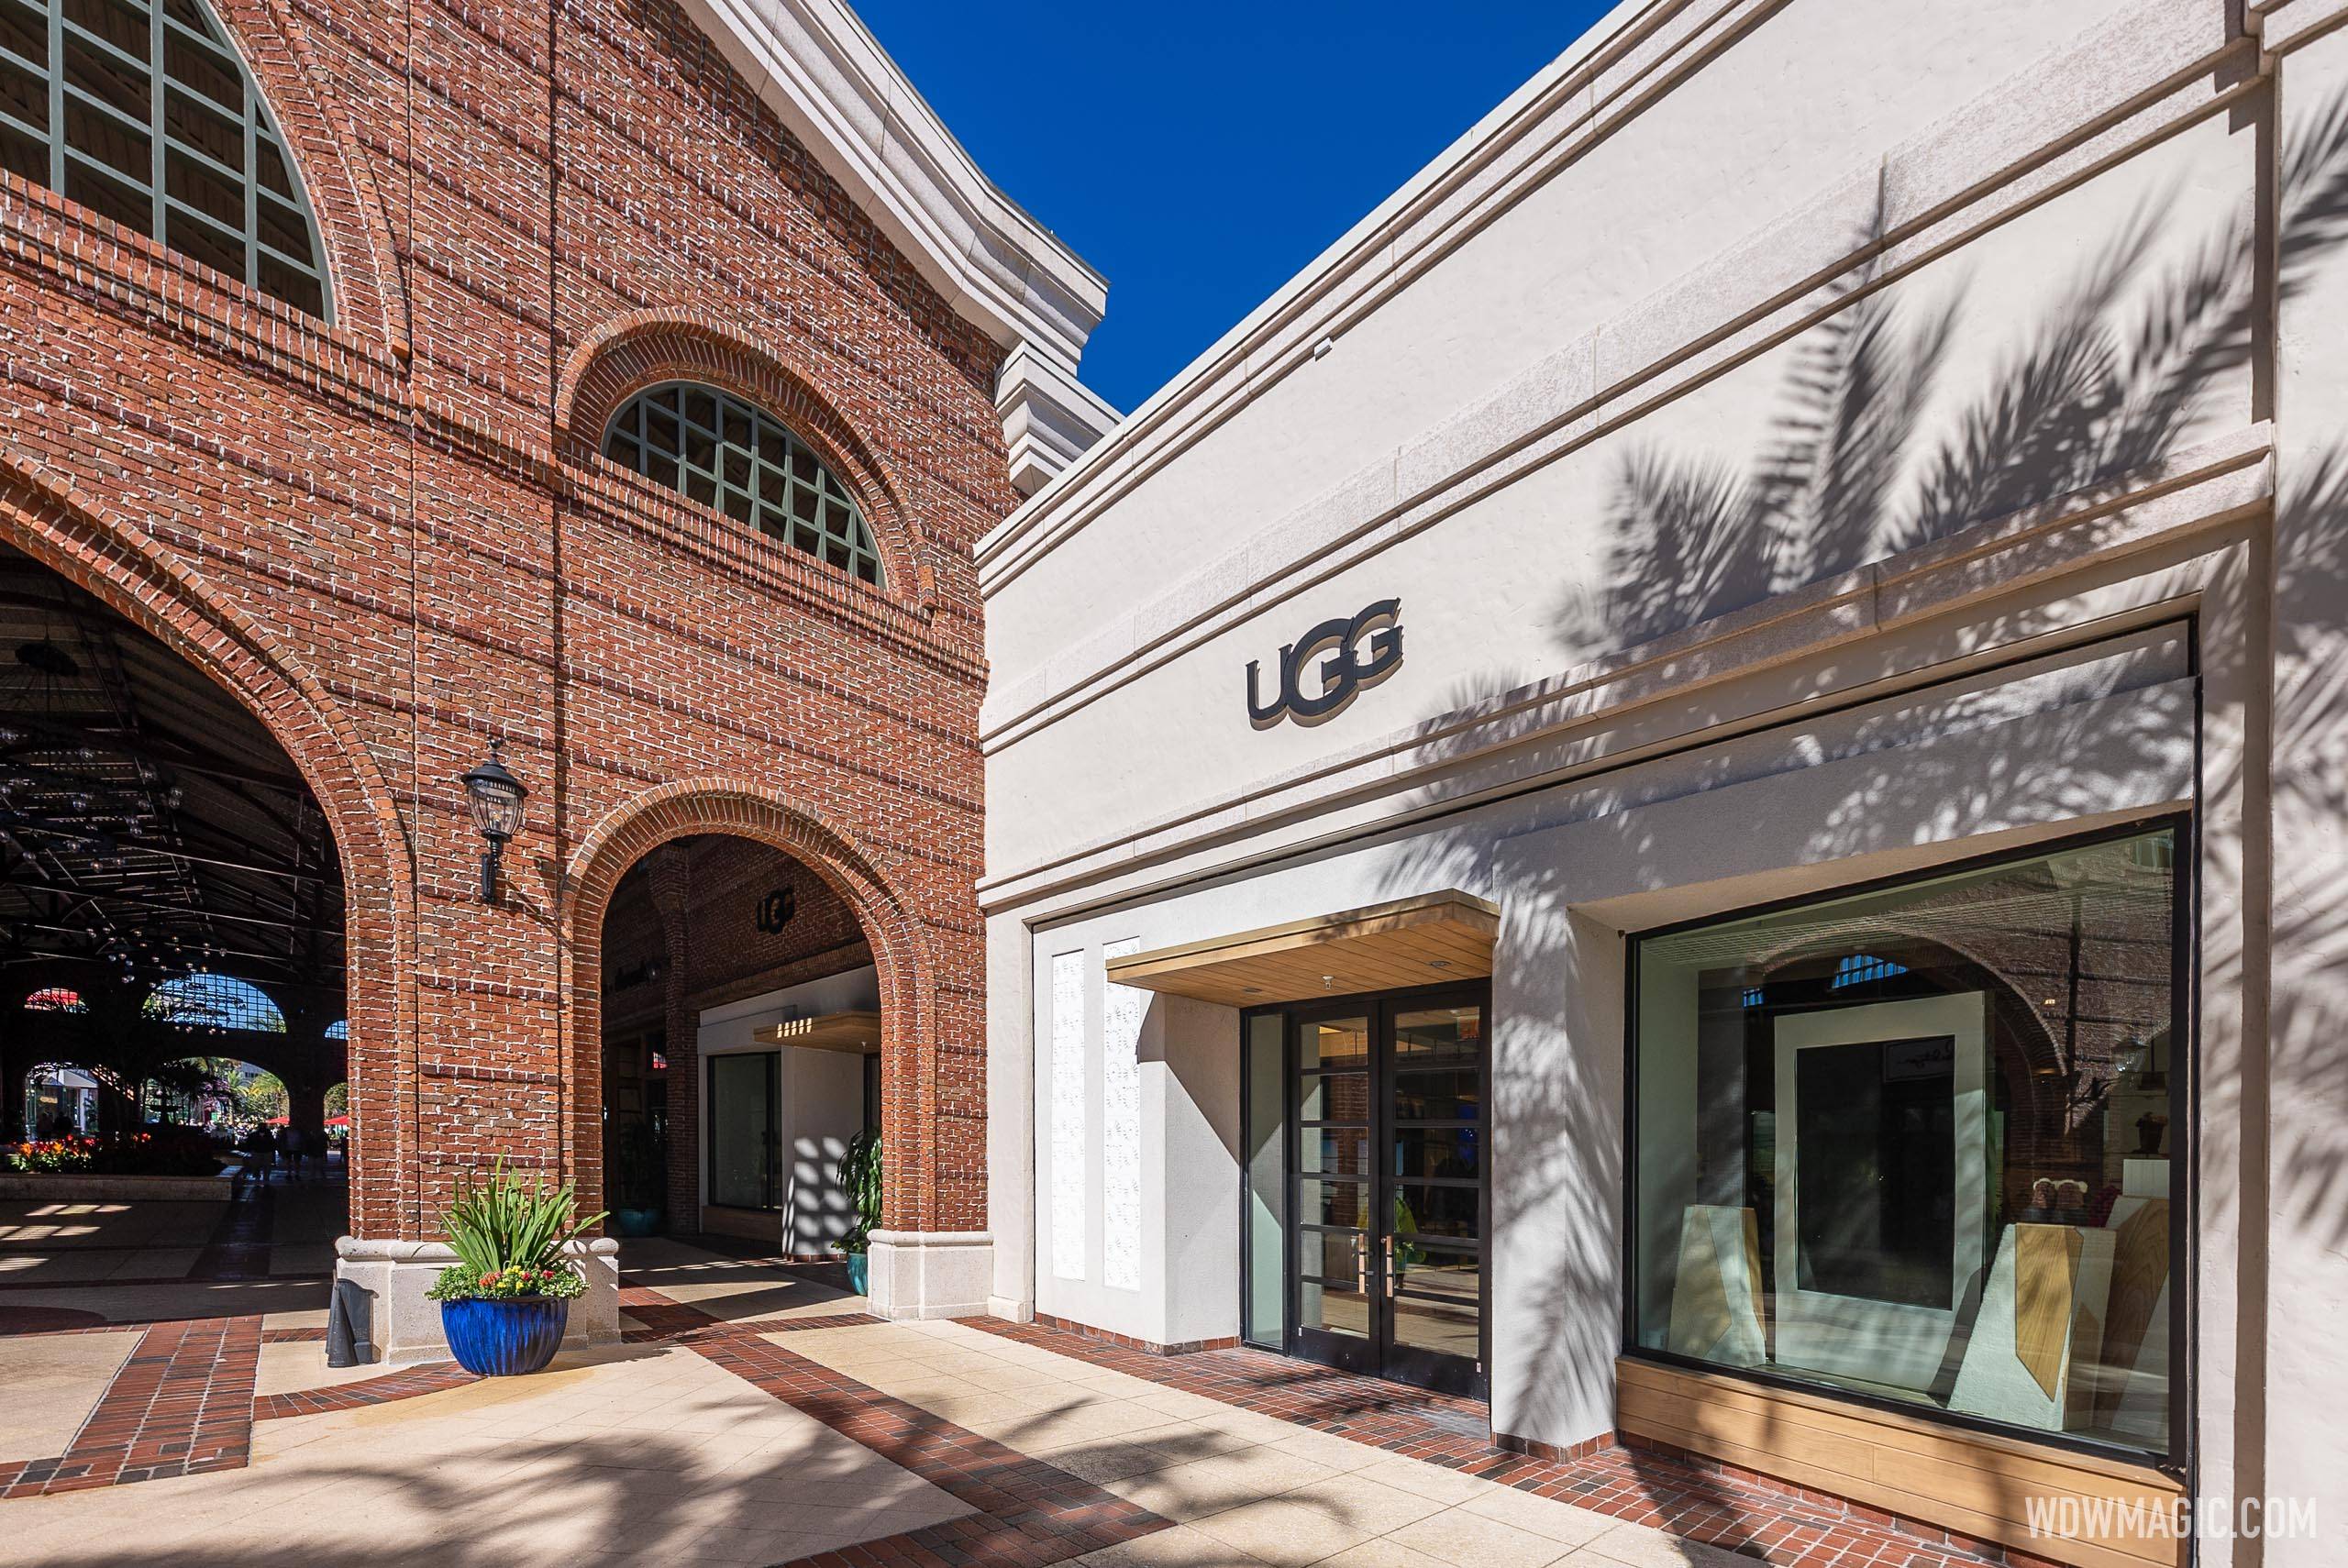 Lululemon opens in new larger location at Disney Springs in Walt